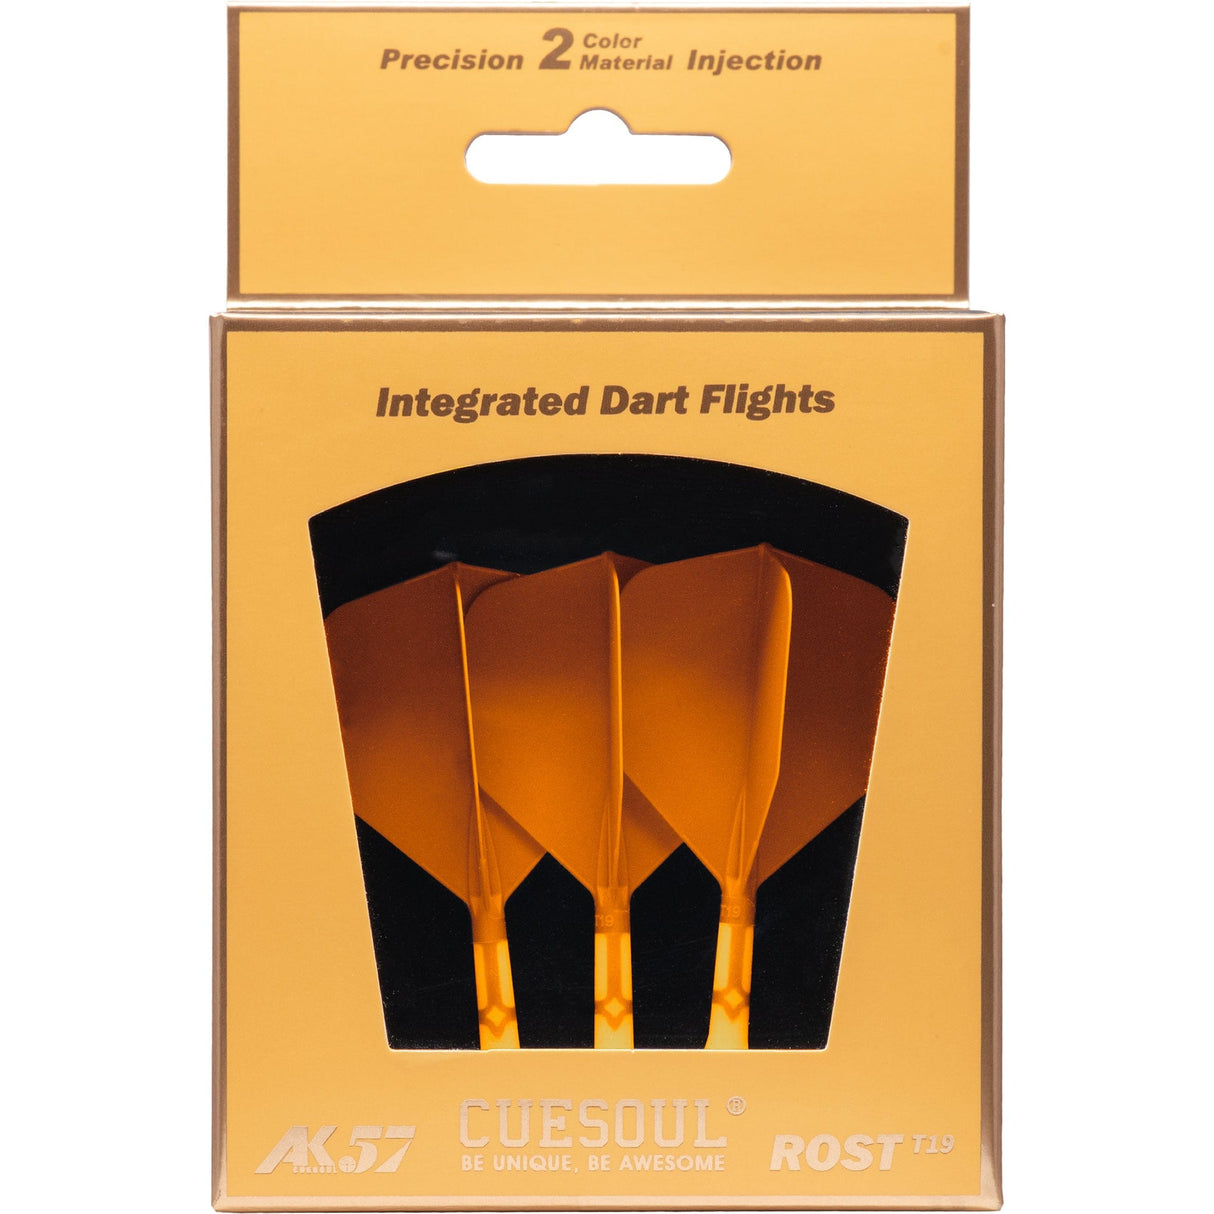 Cuesoul Rost T19 Integrated Dart Shaft and Flights - Big Wing - White with Orange Flight